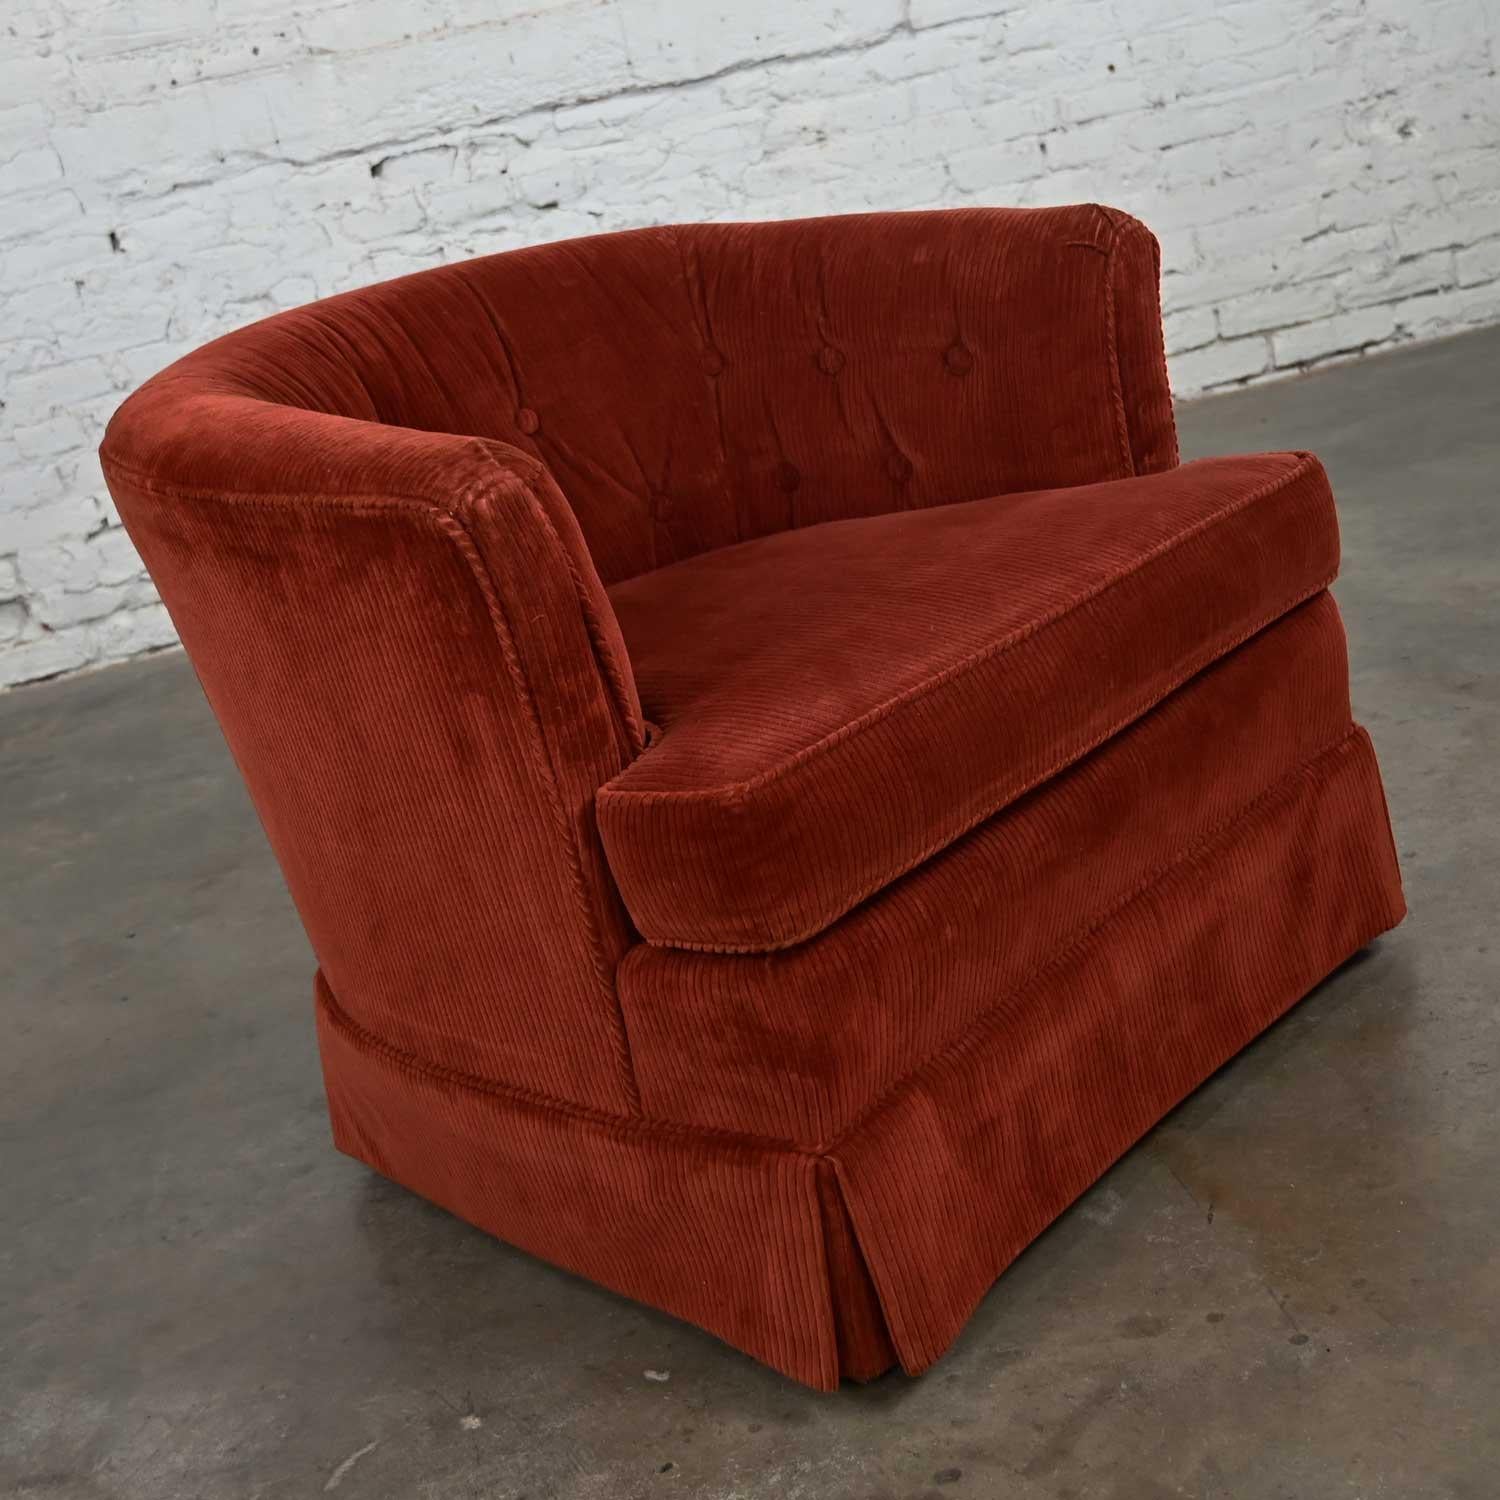 American Burnt Orange Wide Wale Brushed Corduroy Tub Barrel Chair Schuford for Century